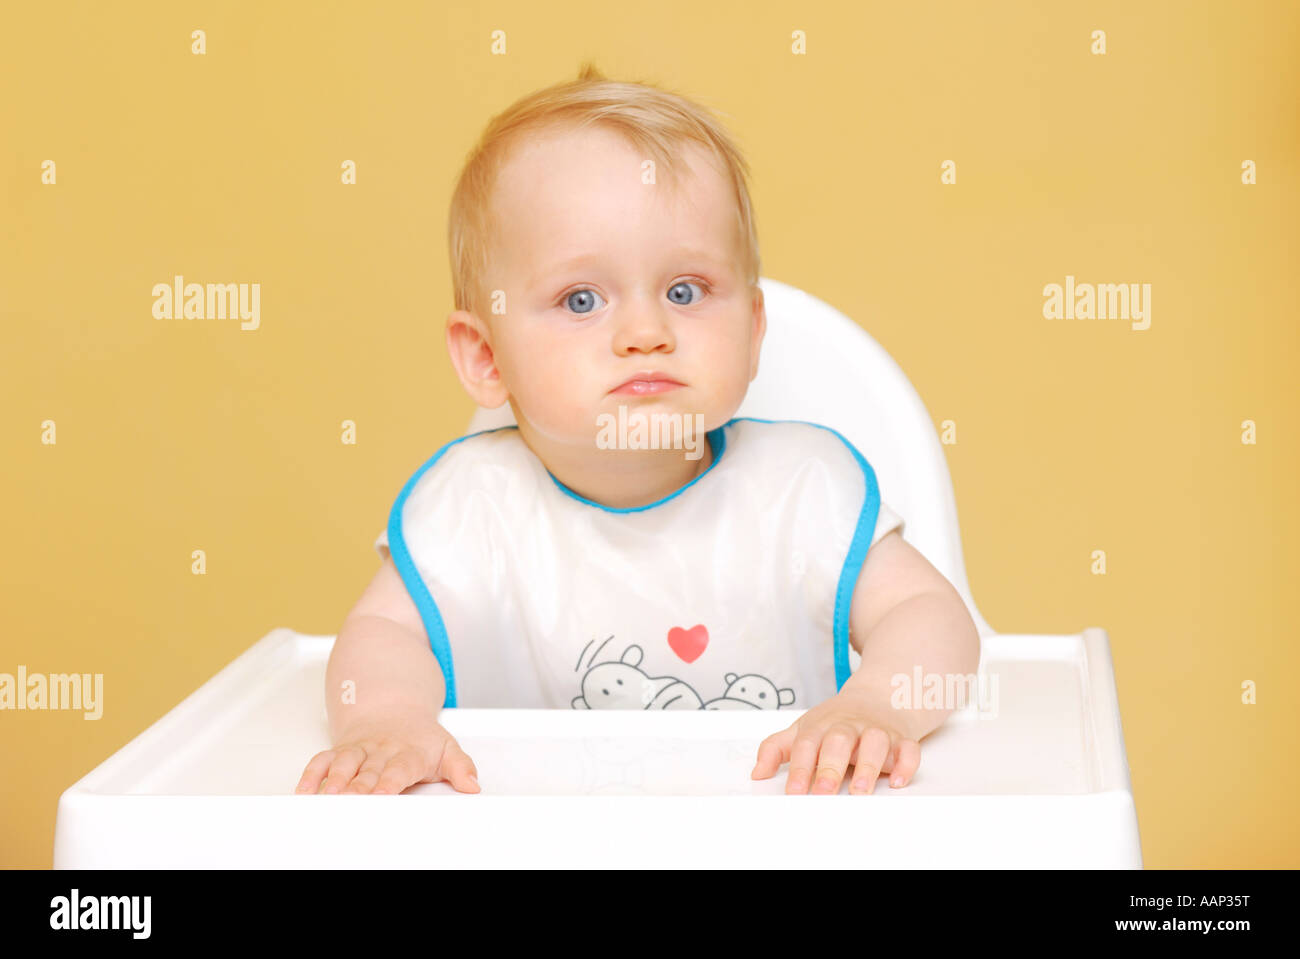 Baby in high chair Stock Photo